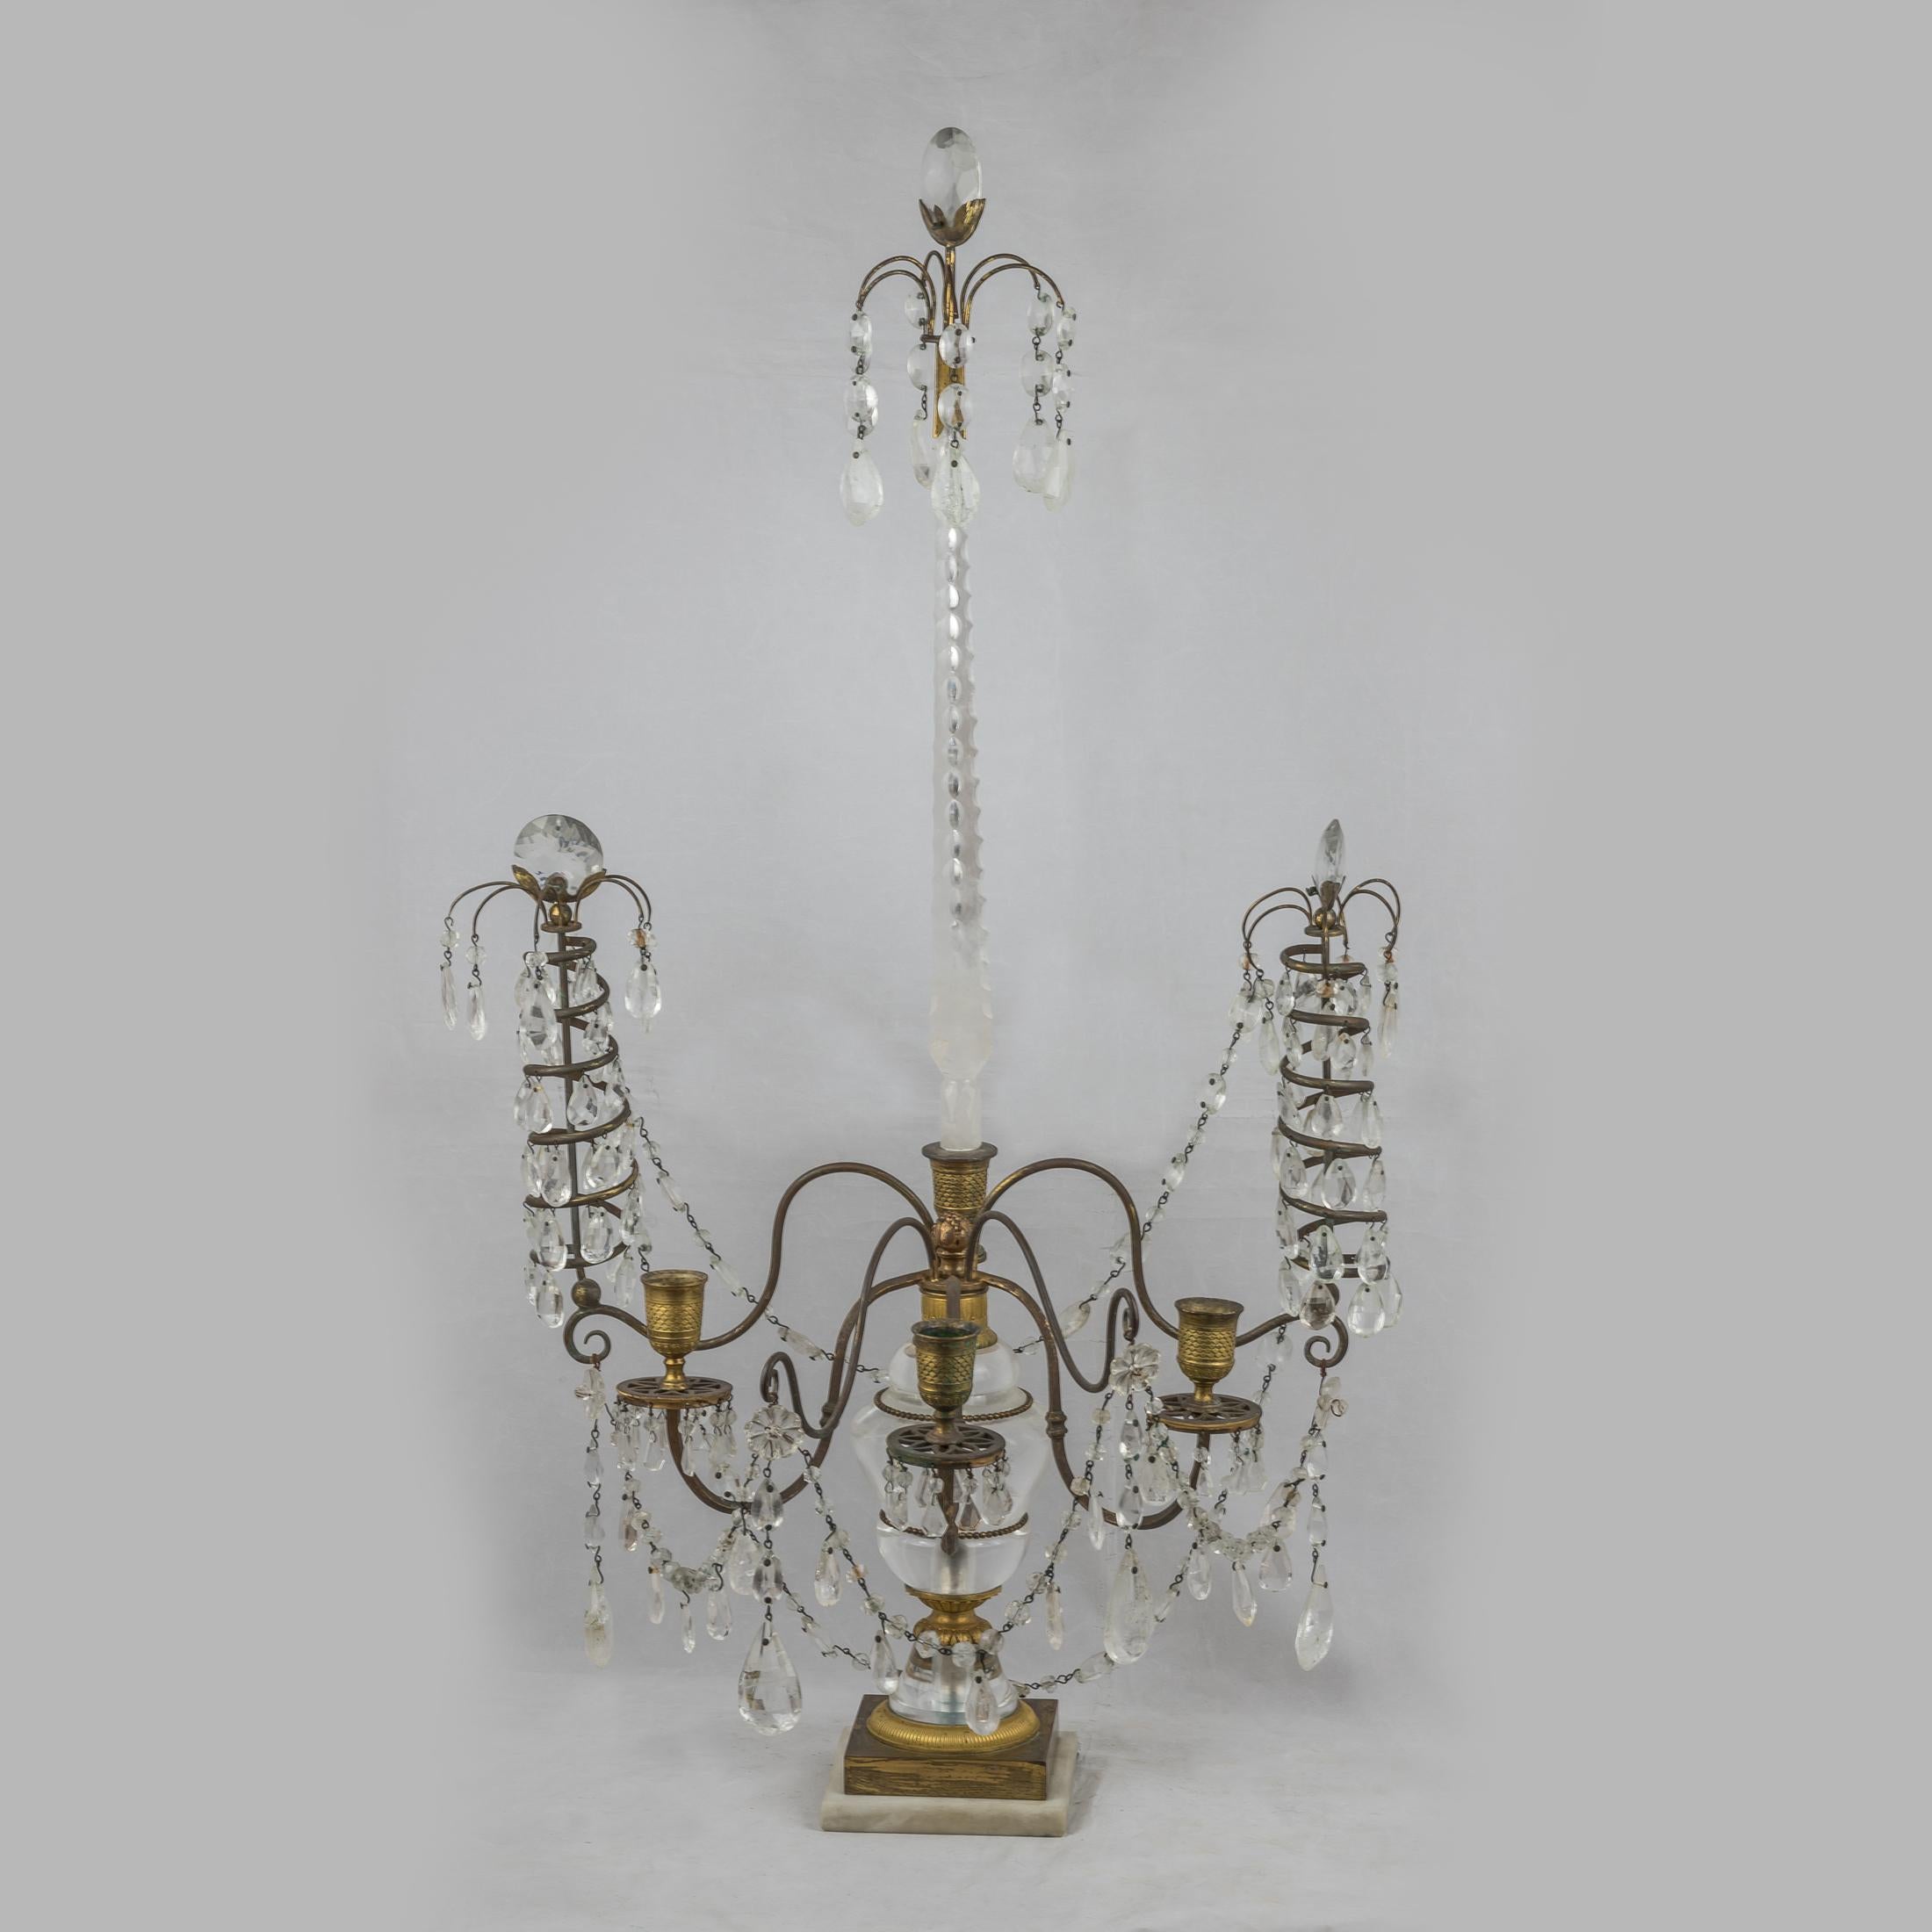 A fine pair of Baltic neo-classical cut glass mounted ormolu, rock crystal and white marble three-light candelabras.

Origin: French
Date: 19th century
Dimension: 30 1/2 in x 16 1/2 in.